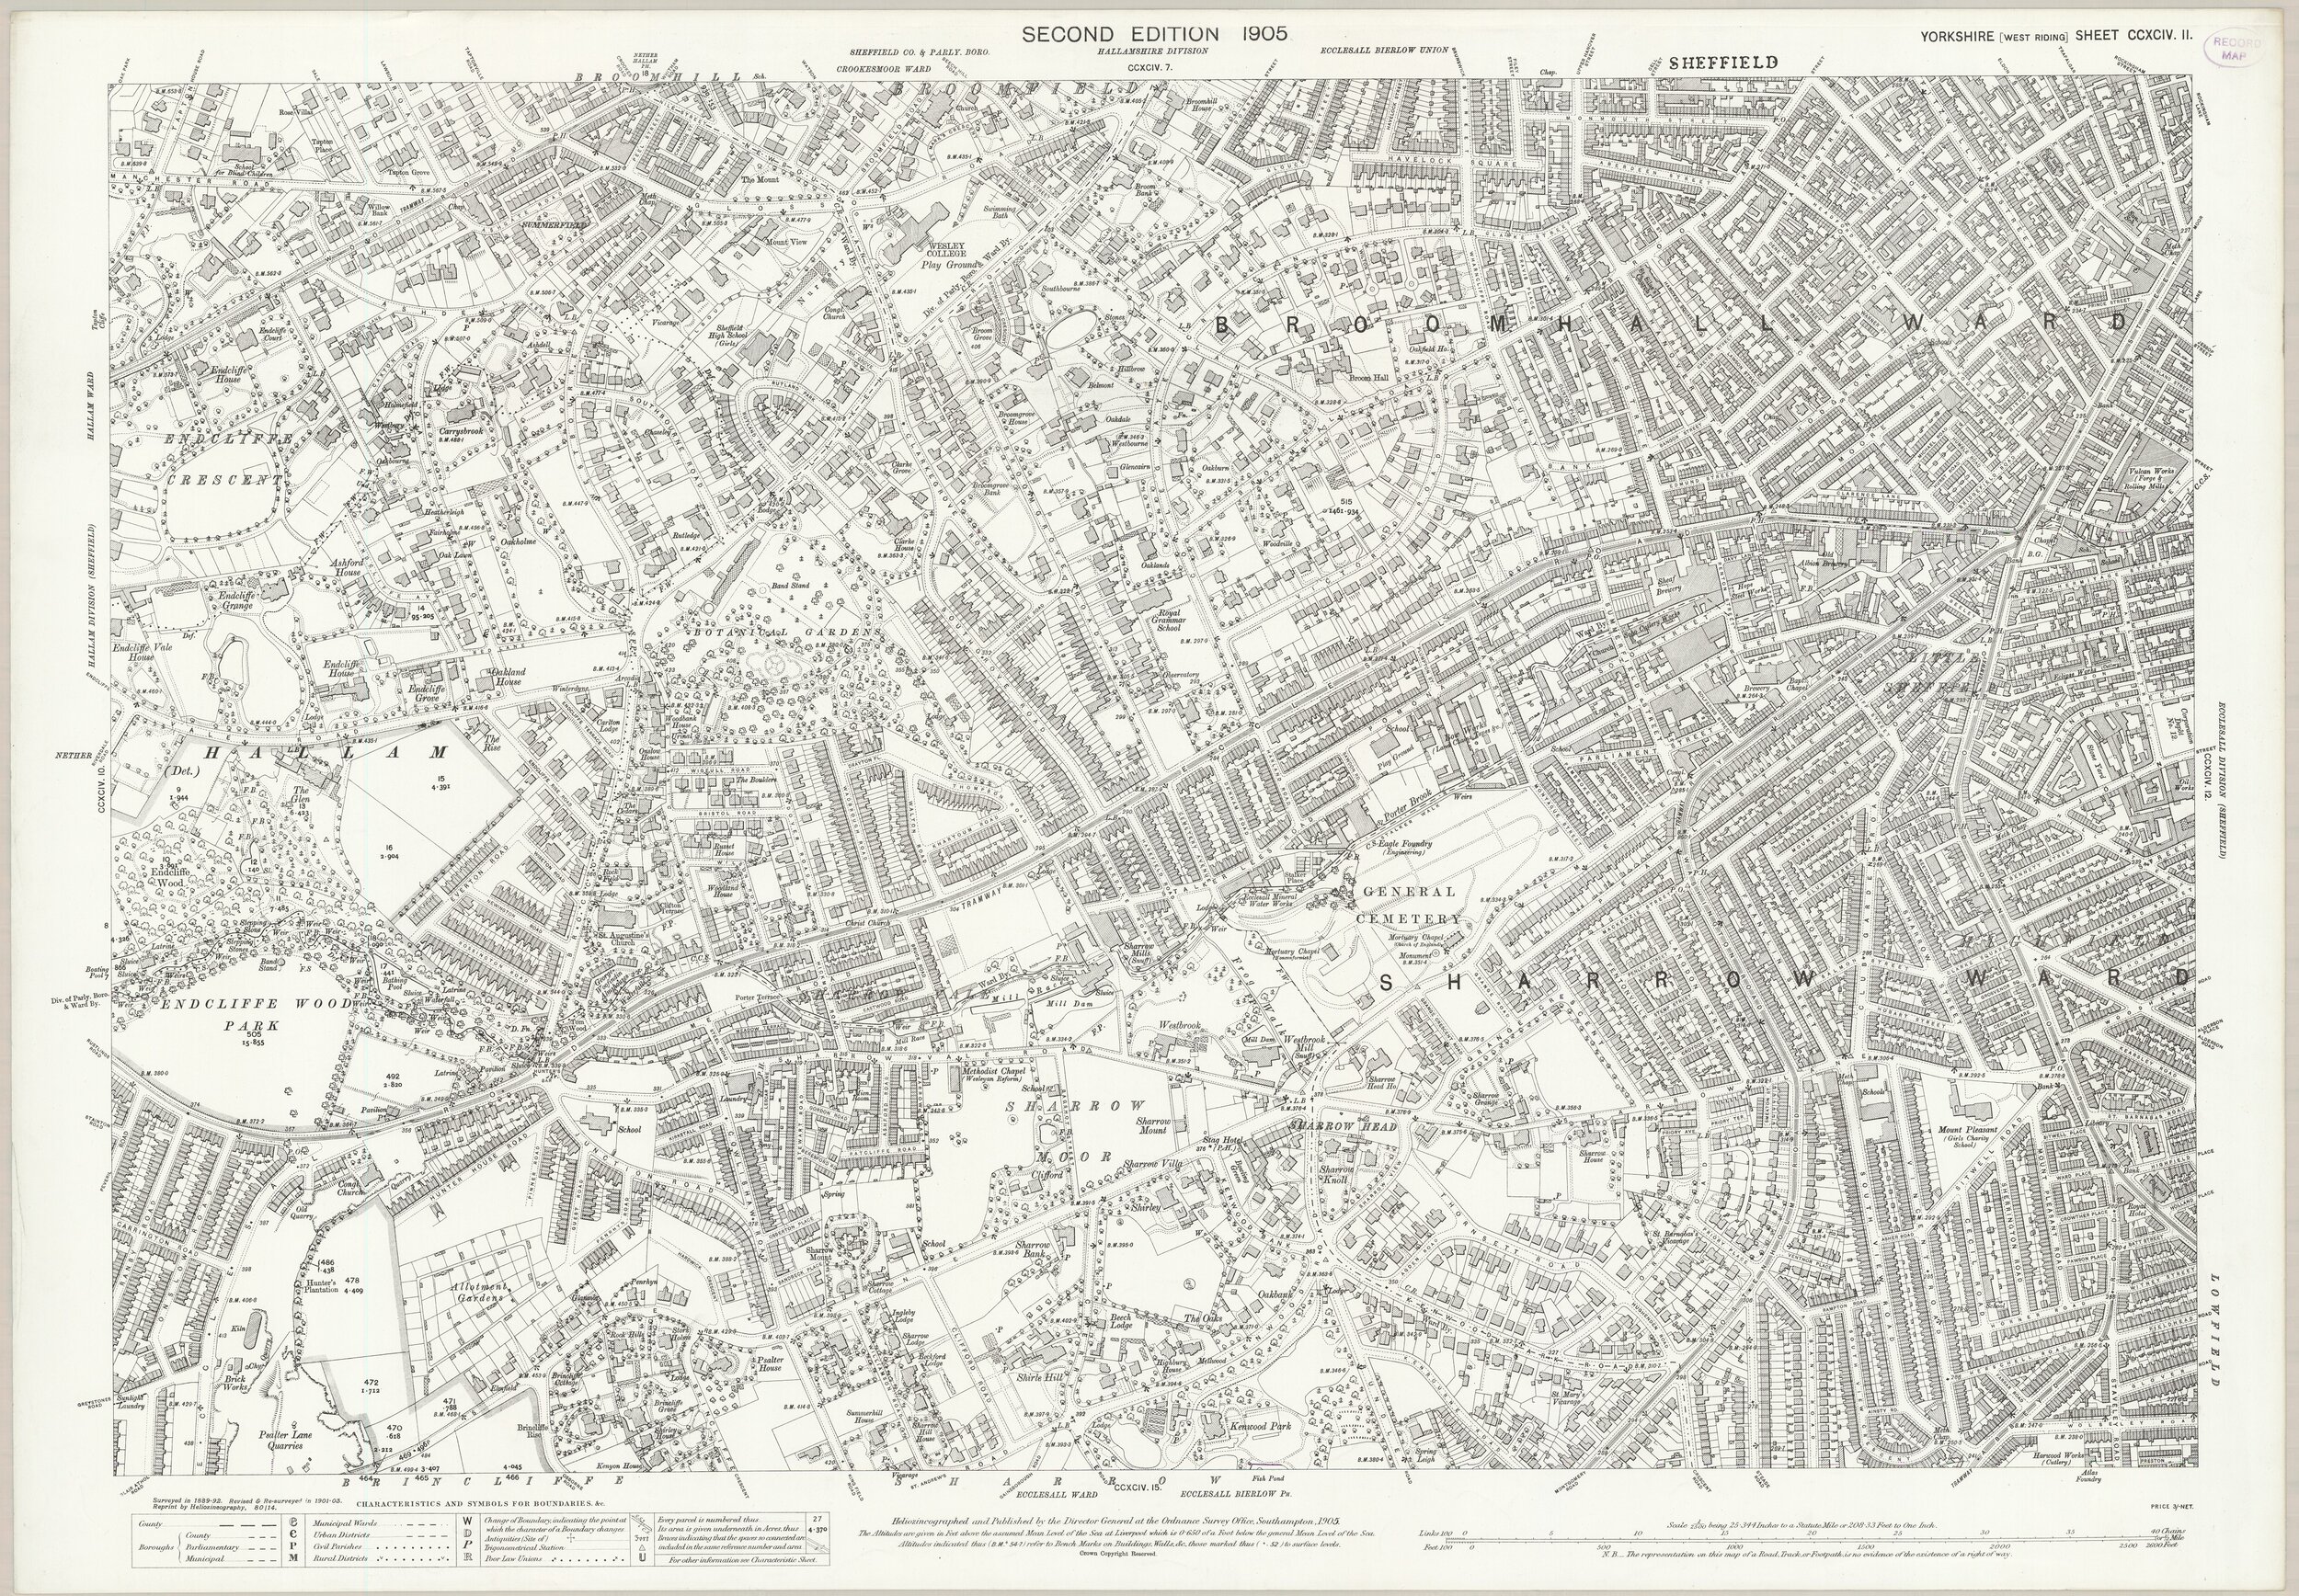 OS Map of Broomgrove Road and Surrounding Areas - 1905